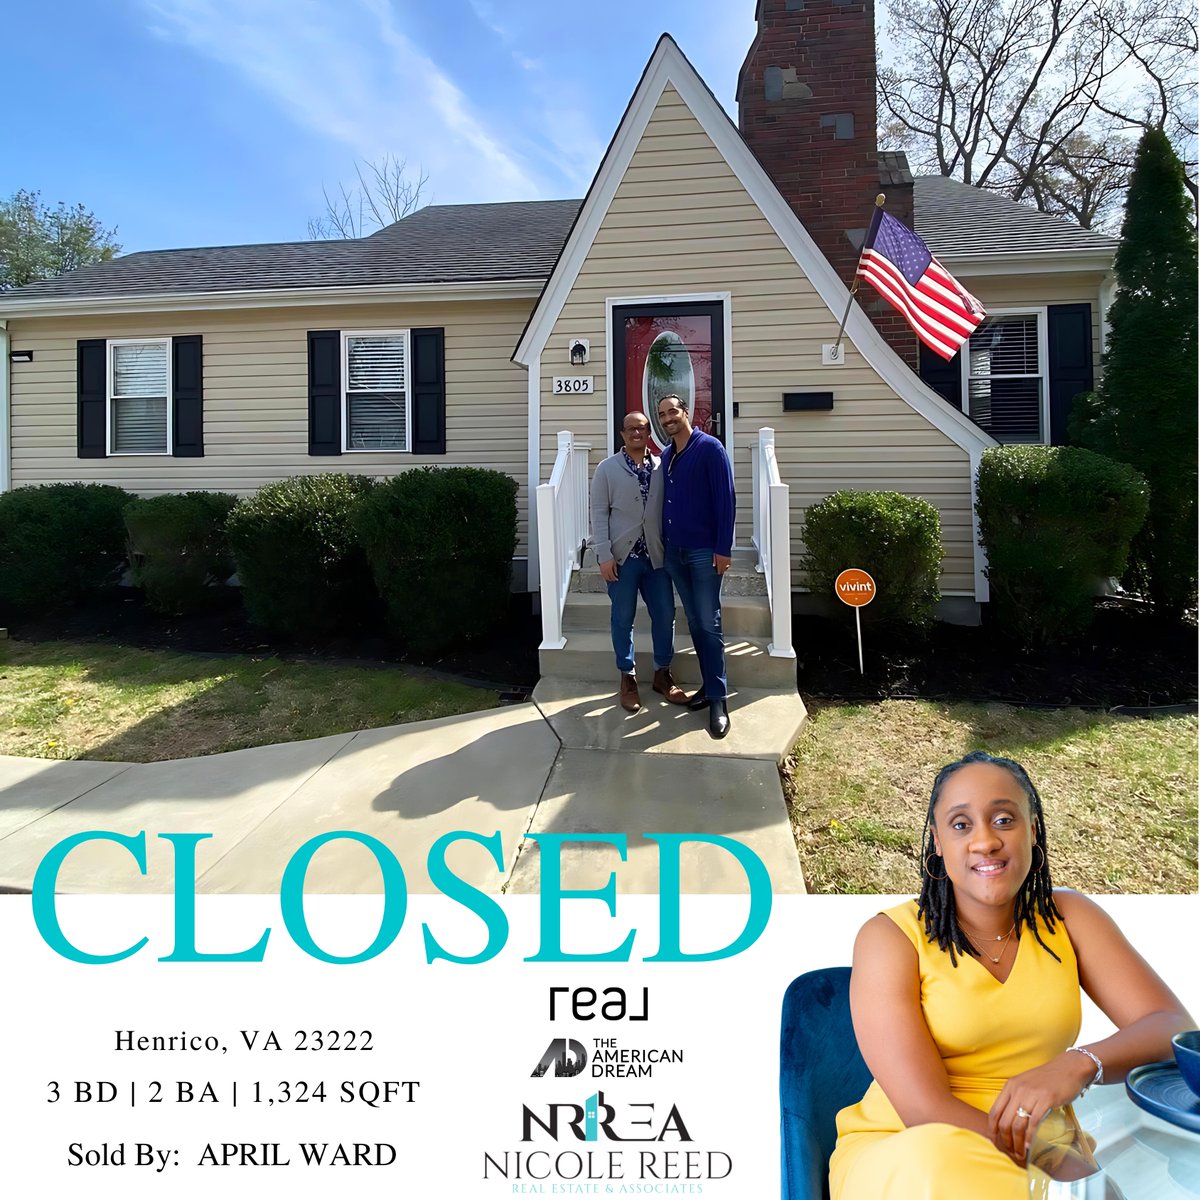 🔑 Happy key day!!!  👏  April on our team just helped a buyer close on their home purchase yesterday after helping them house shop since February!  🏡

#sold / #NicoleReedRealEstate /  #nicolereed / #aprilward / #richmondrealestate /  #henricova / #realestateredefined